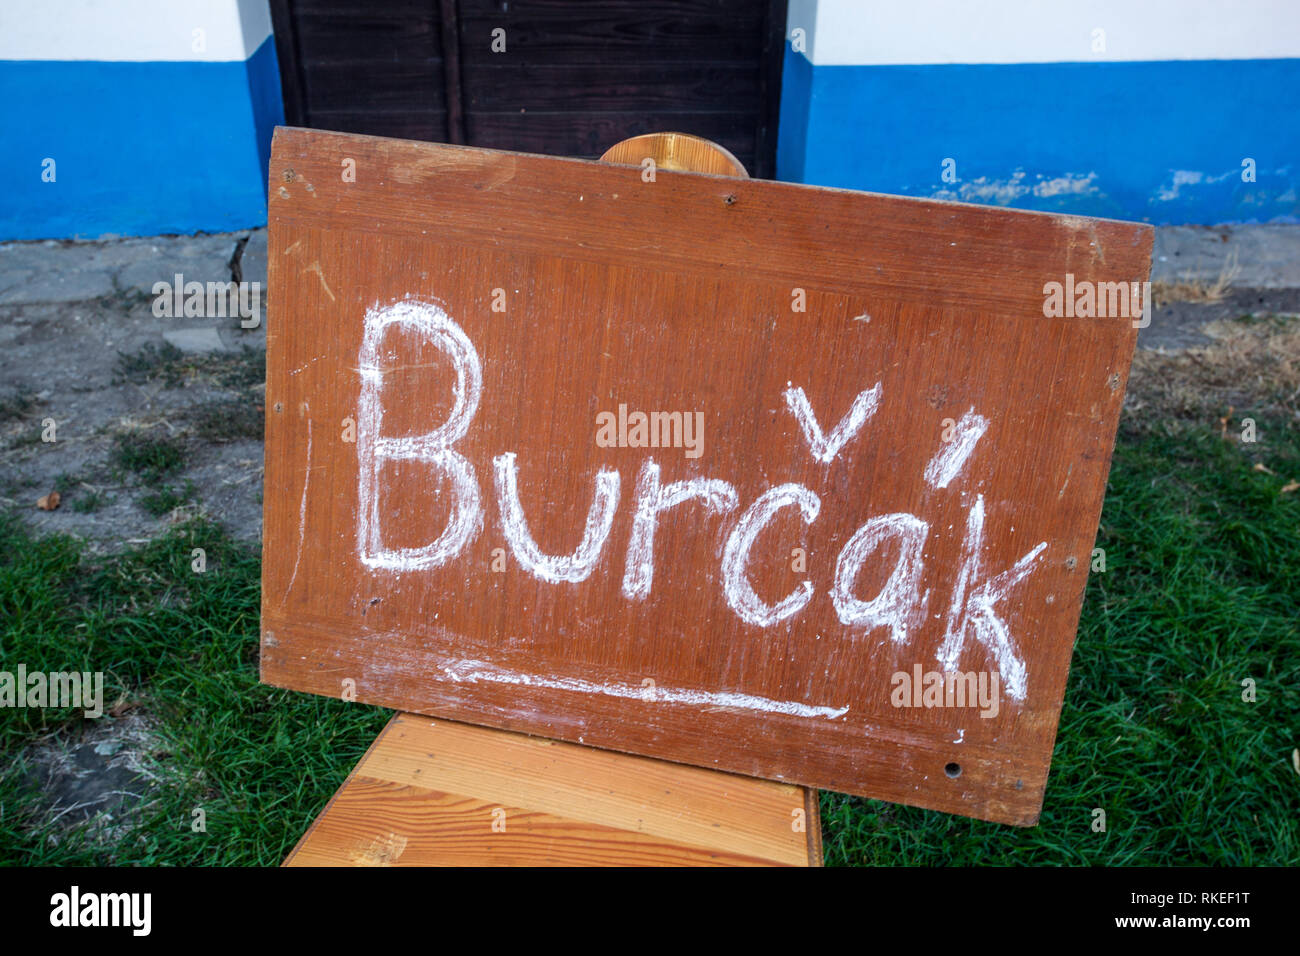 Burcak is a Czech name for young wine, a sign that offers this drink Stock Photo